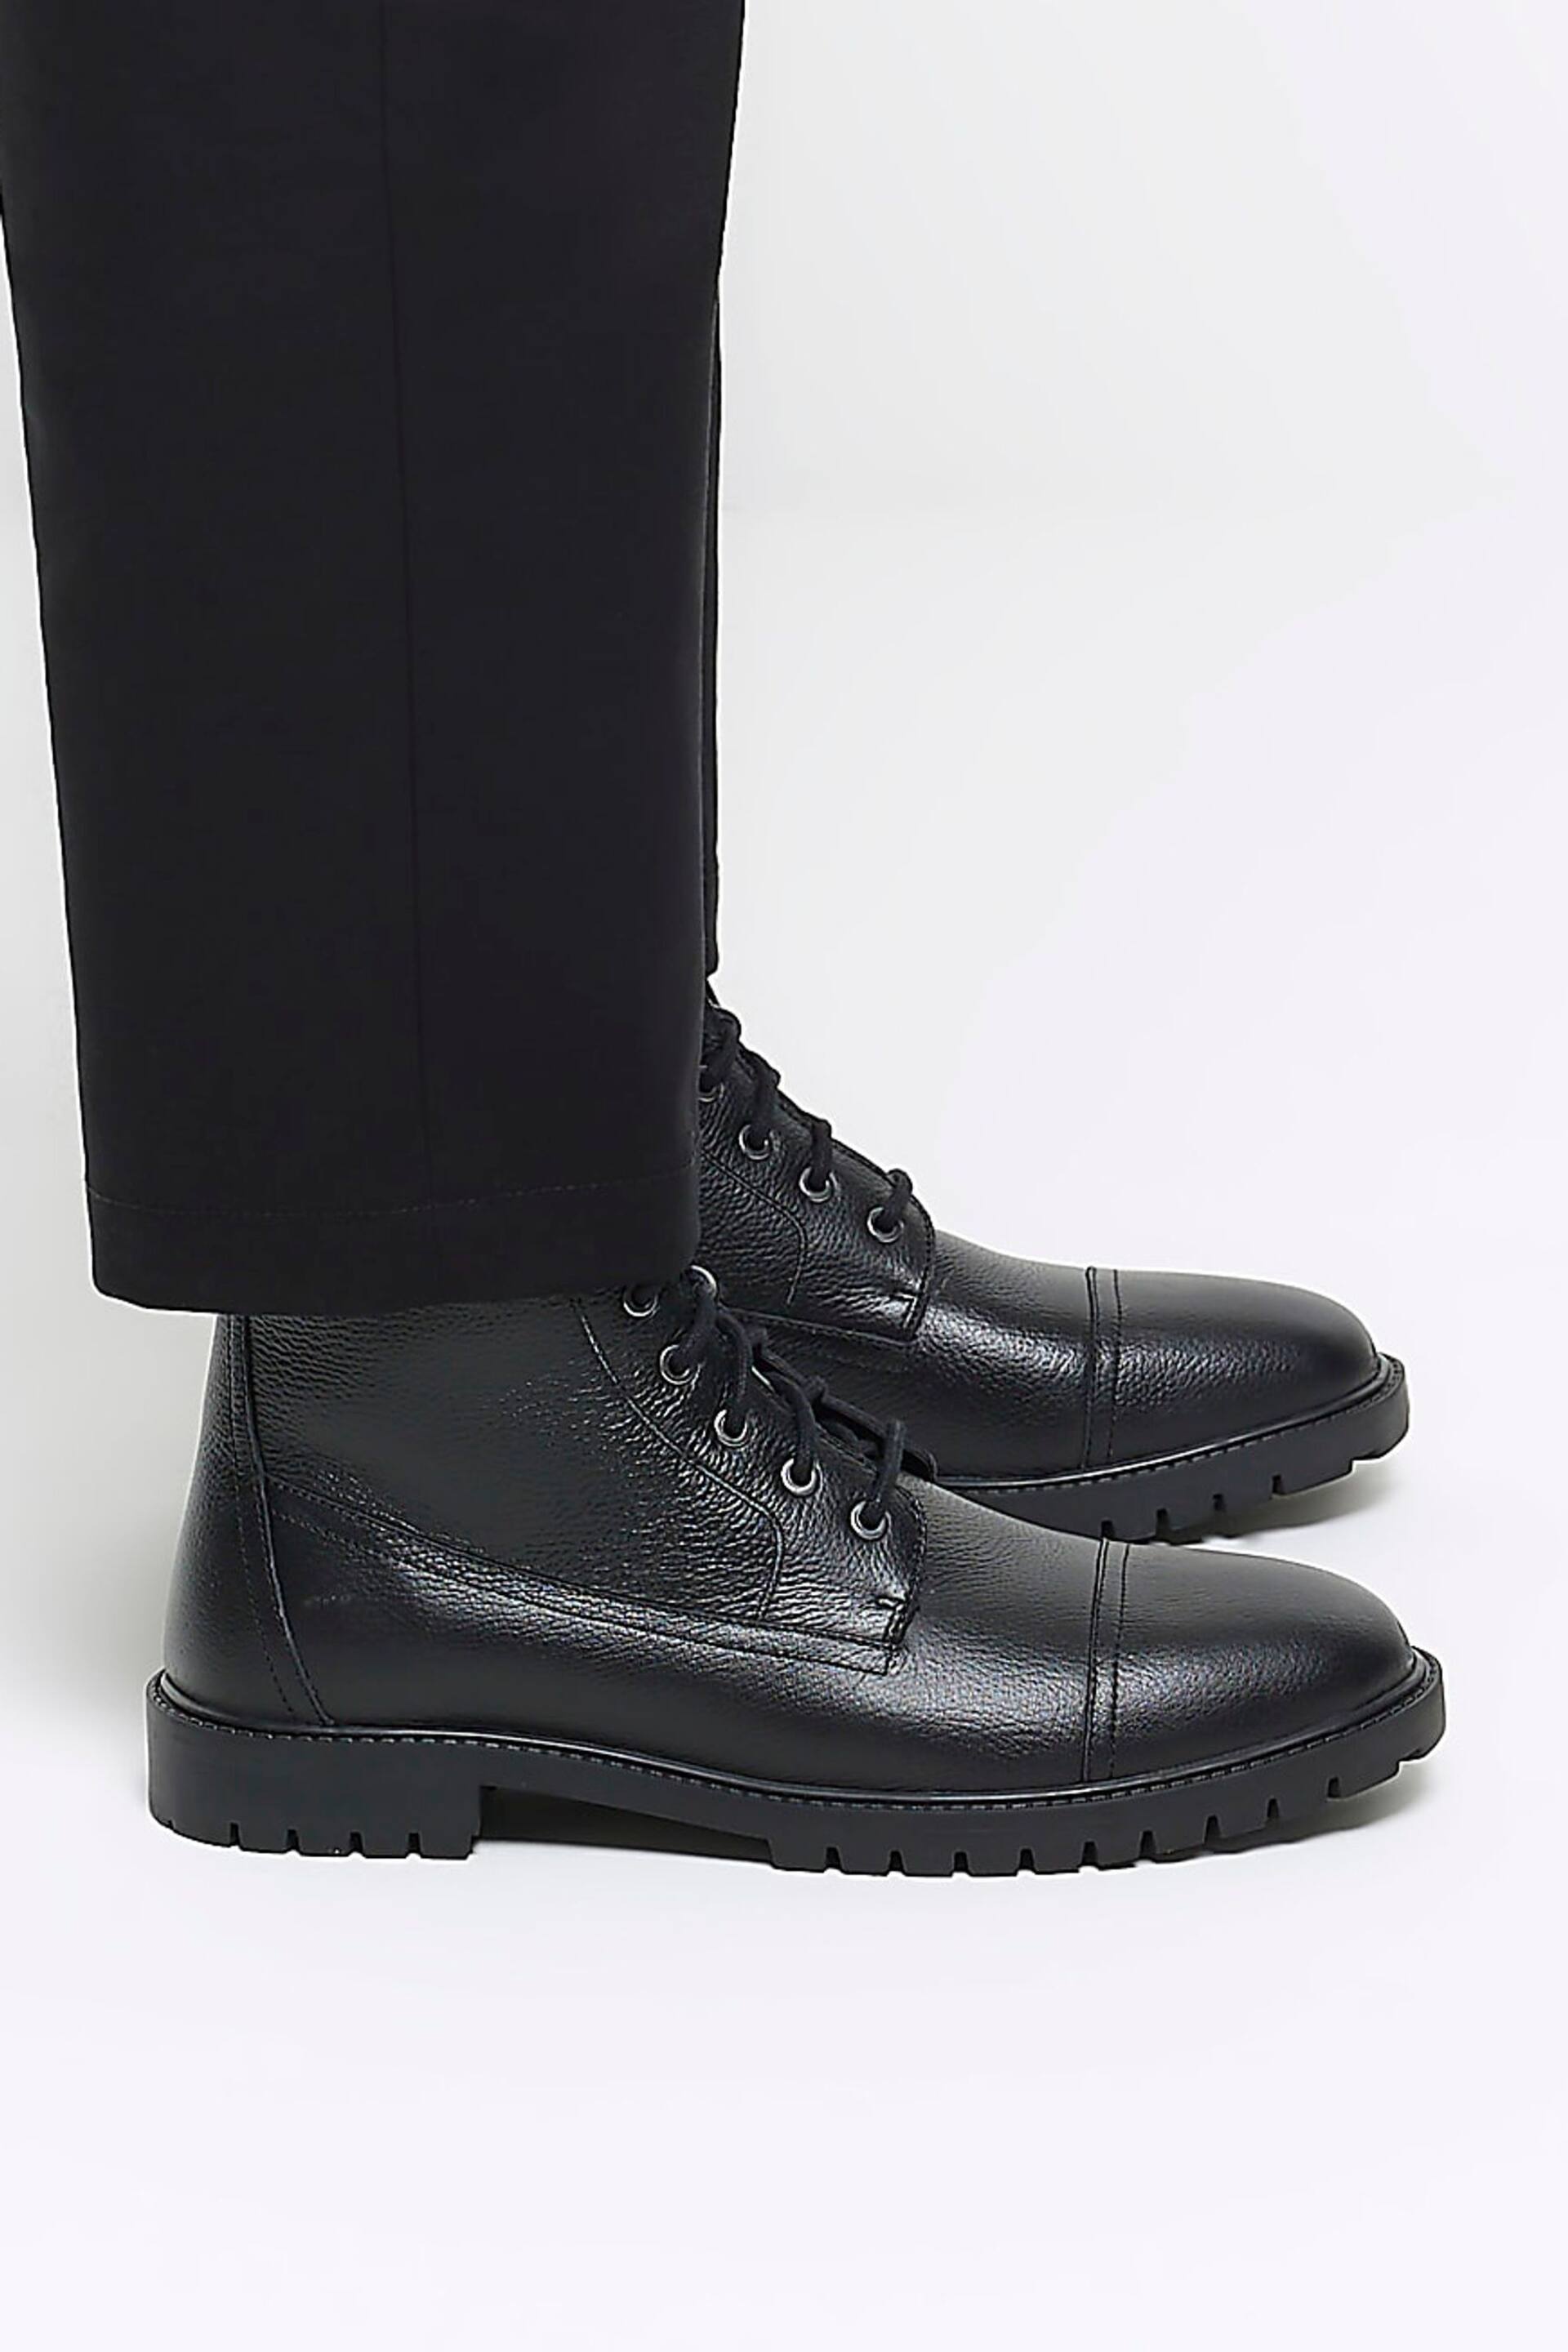 River Island Black Leather Leather Laced Combat Boots - Image 5 of 5